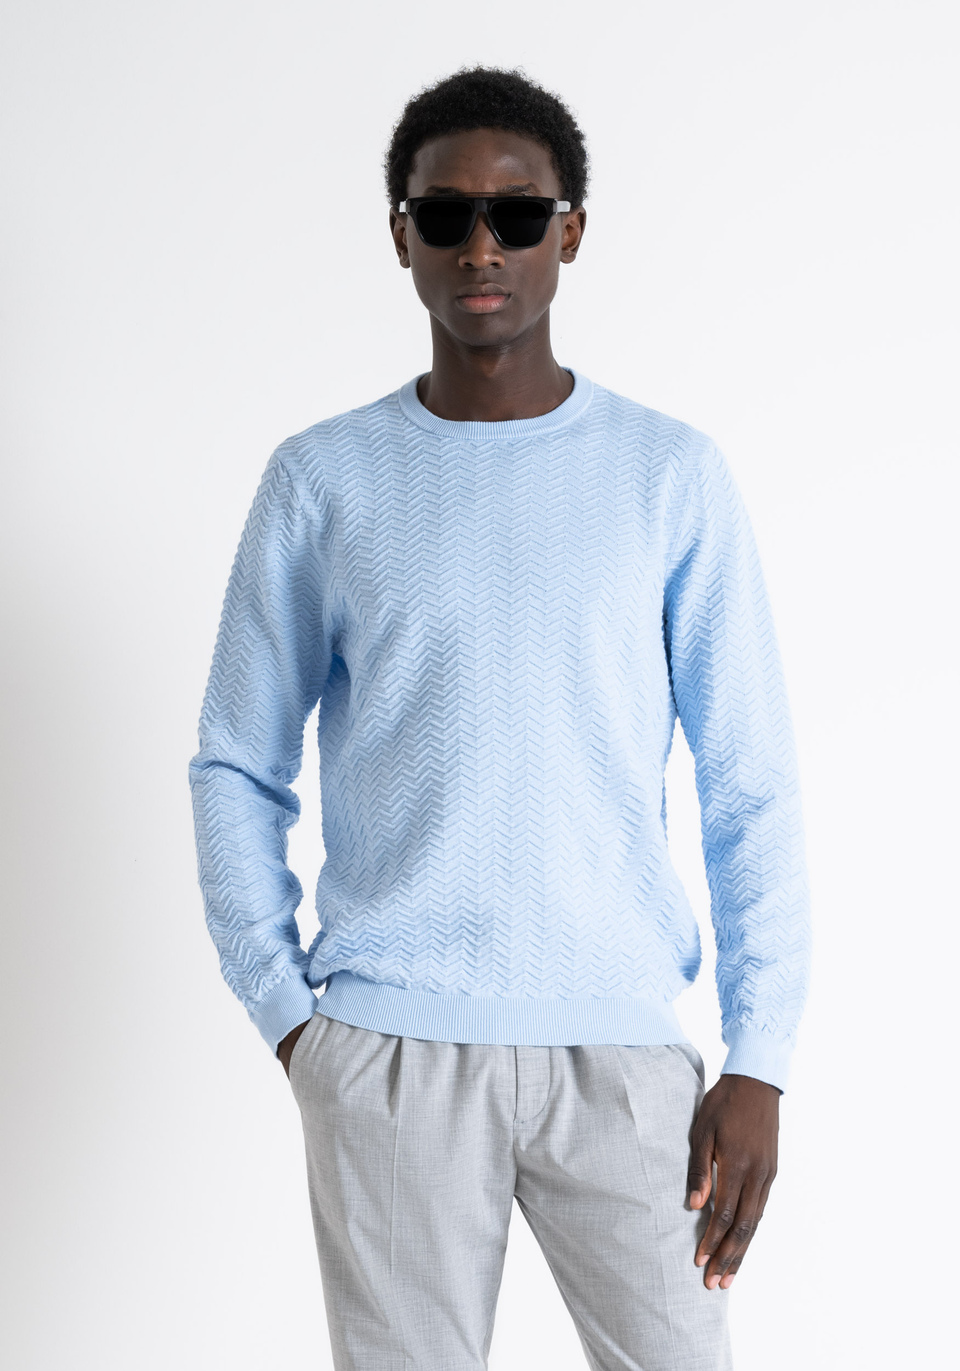 REGULAR FIT SWEATER IN SOFT SOLID-COLOUR COTTON YARN WITH JACQUARD PATTERN - Antony Morato Online Shop